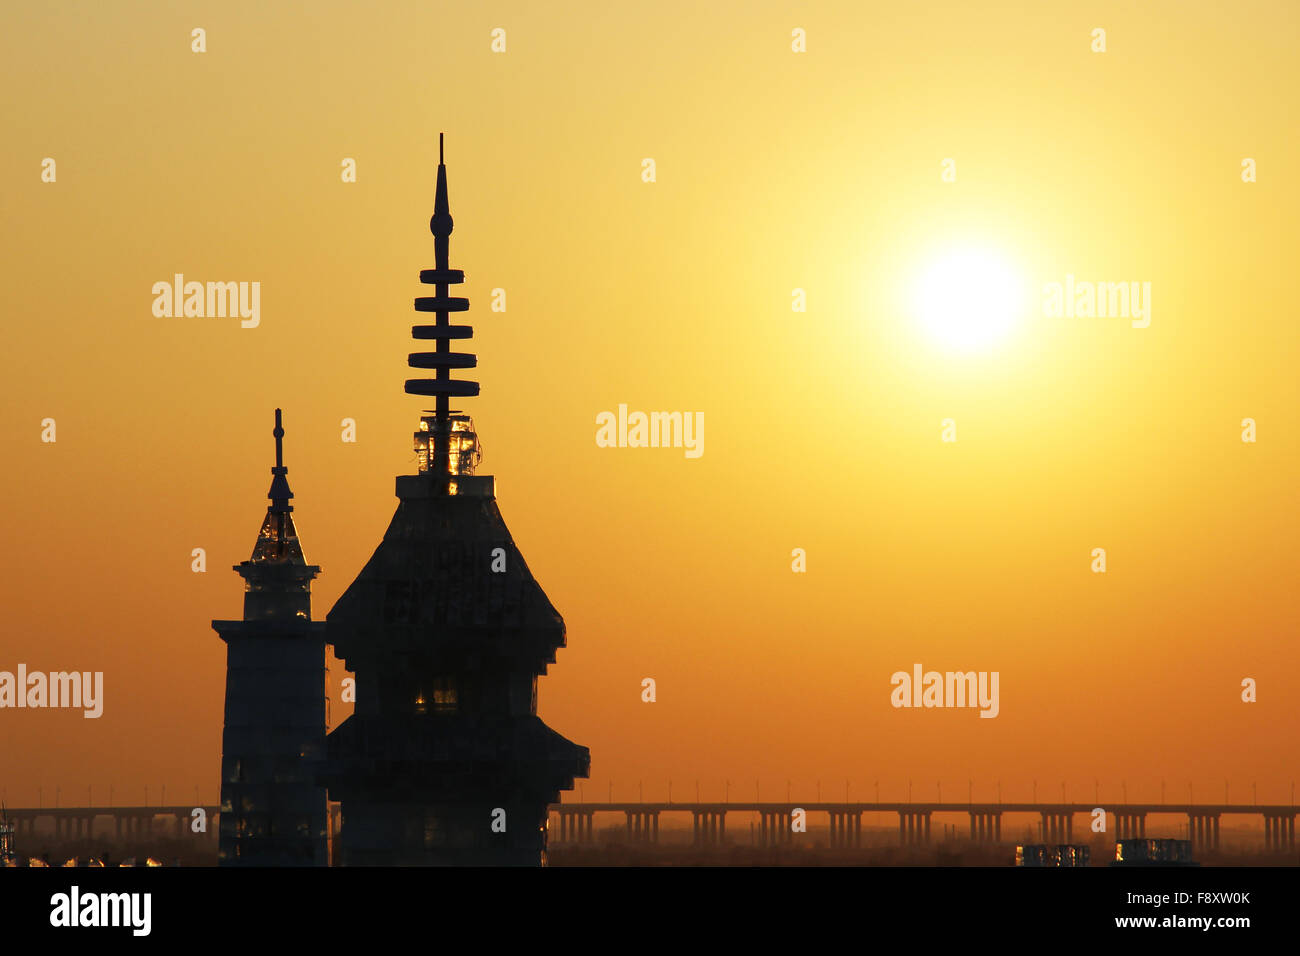 Ice building silhouette at sunset in China Stock Photo